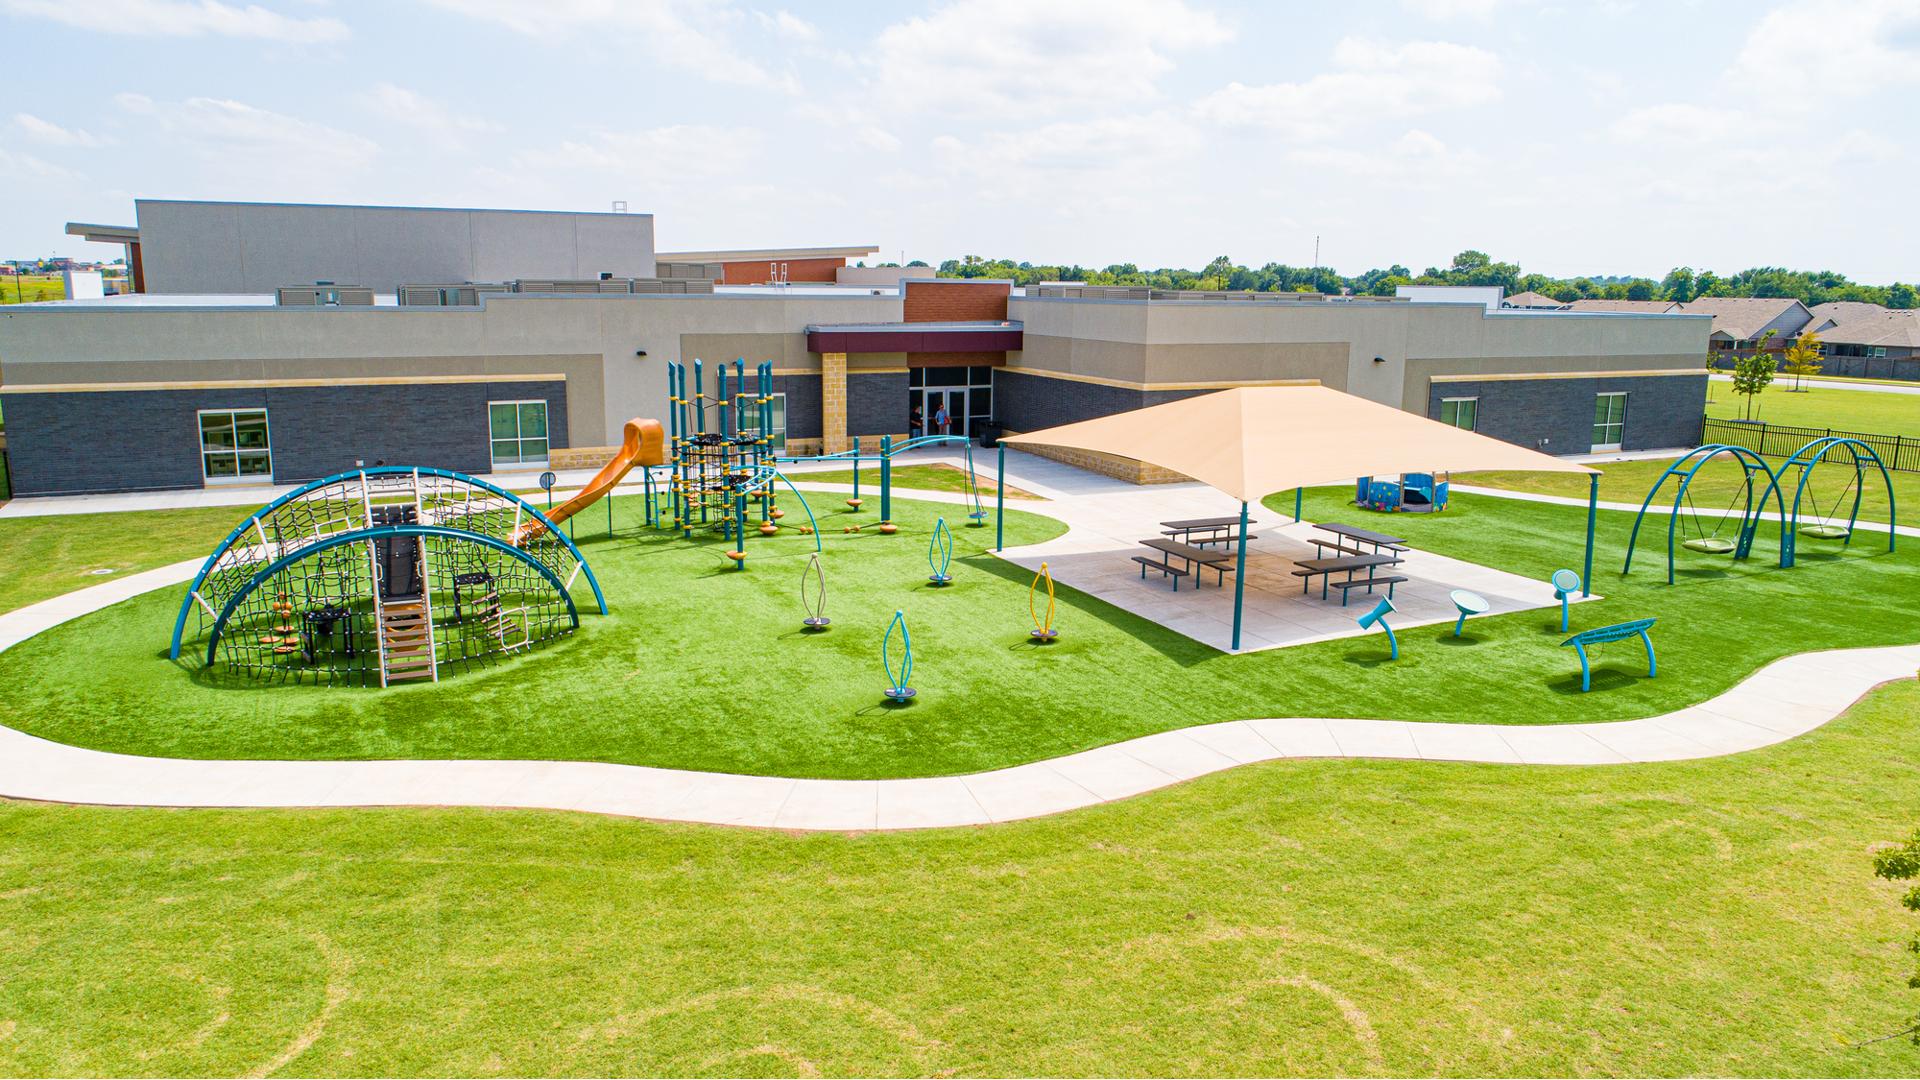 Elevated view of an outdoor school playground with play structures standing spinners, swing set, and outdoor musical instruments. A small meeting area with picnic tables sits in the middle of the play area under a large tan square shade.